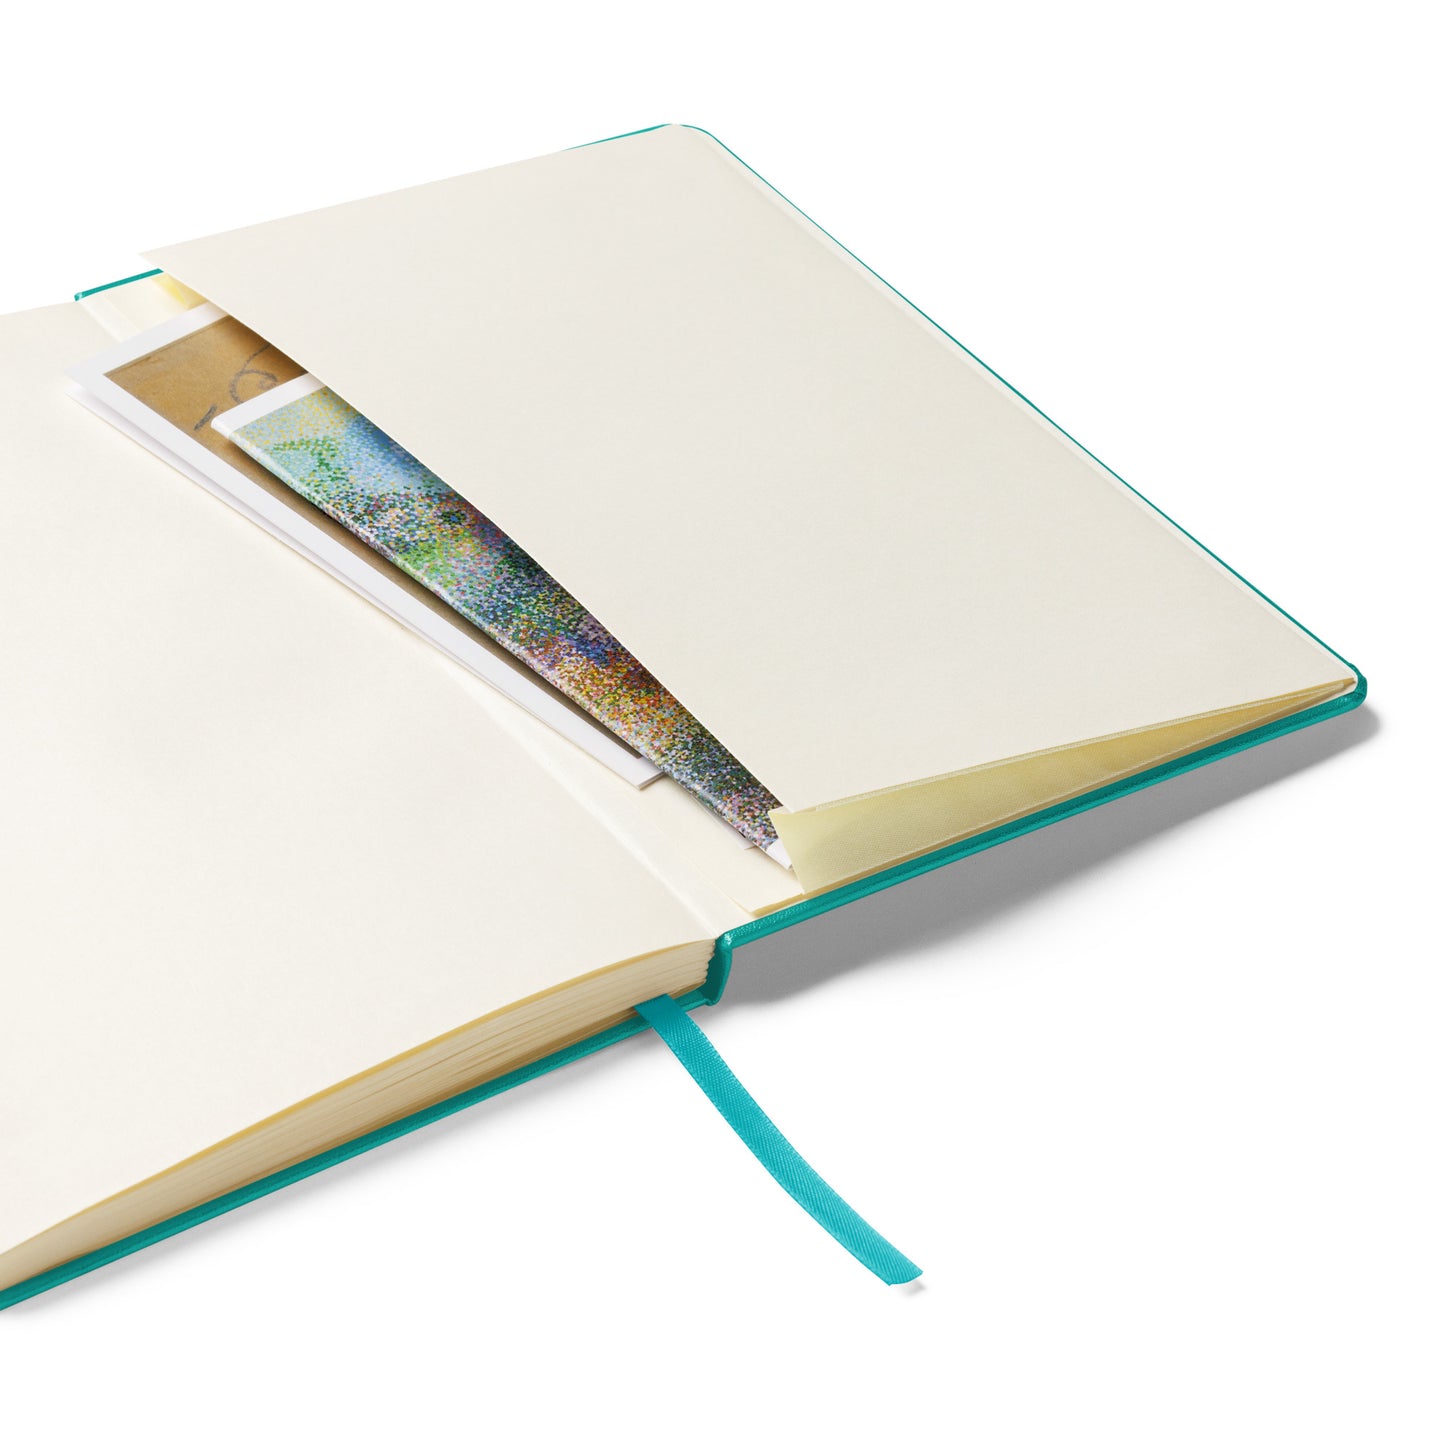 Better With Birds Hardcover Notebook